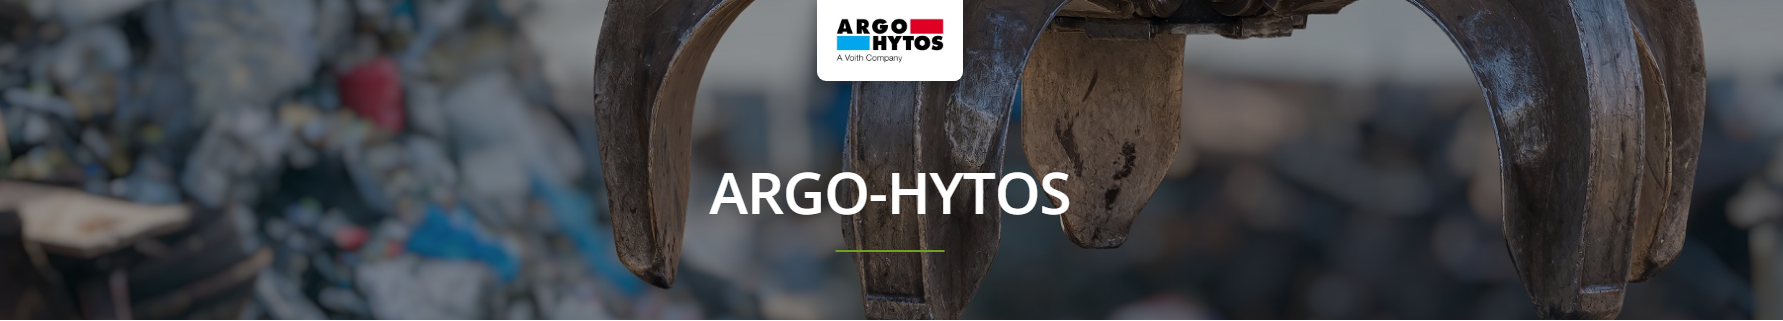 Argo-Hytos Manifolds and Connecting Plates